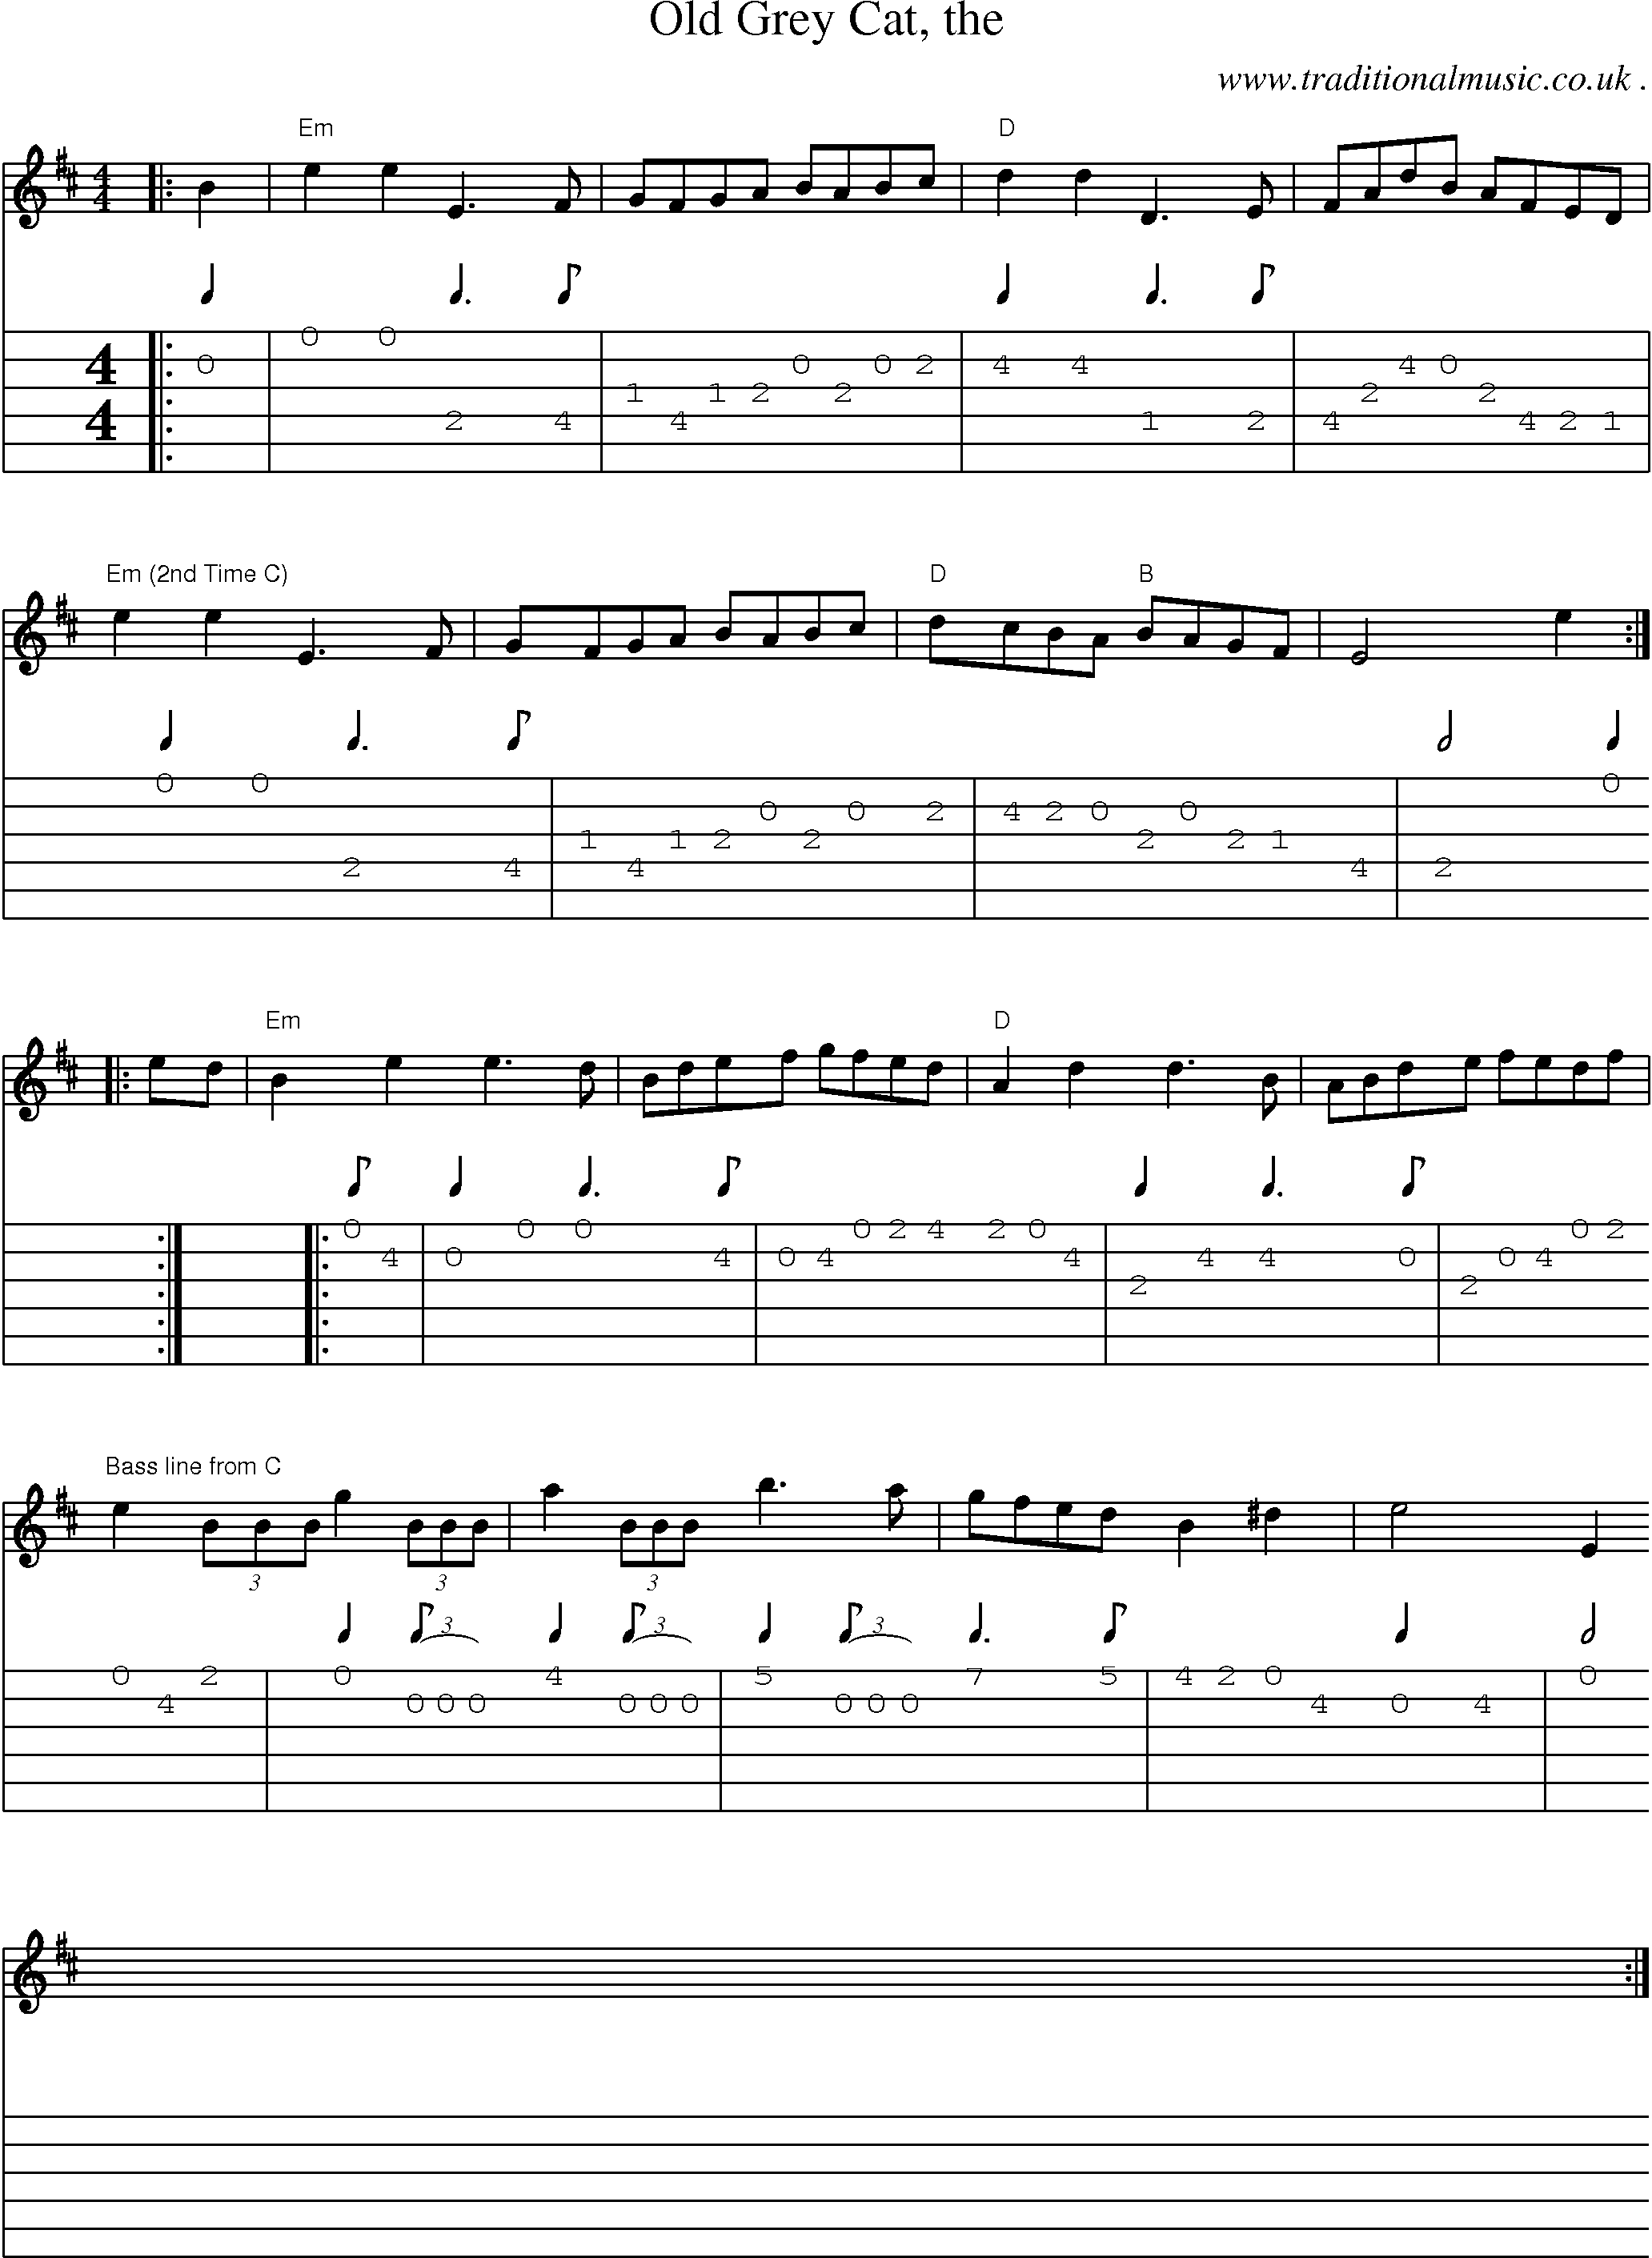 Sheet-music  score, Chords and Guitar Tabs for Old Grey Cat The